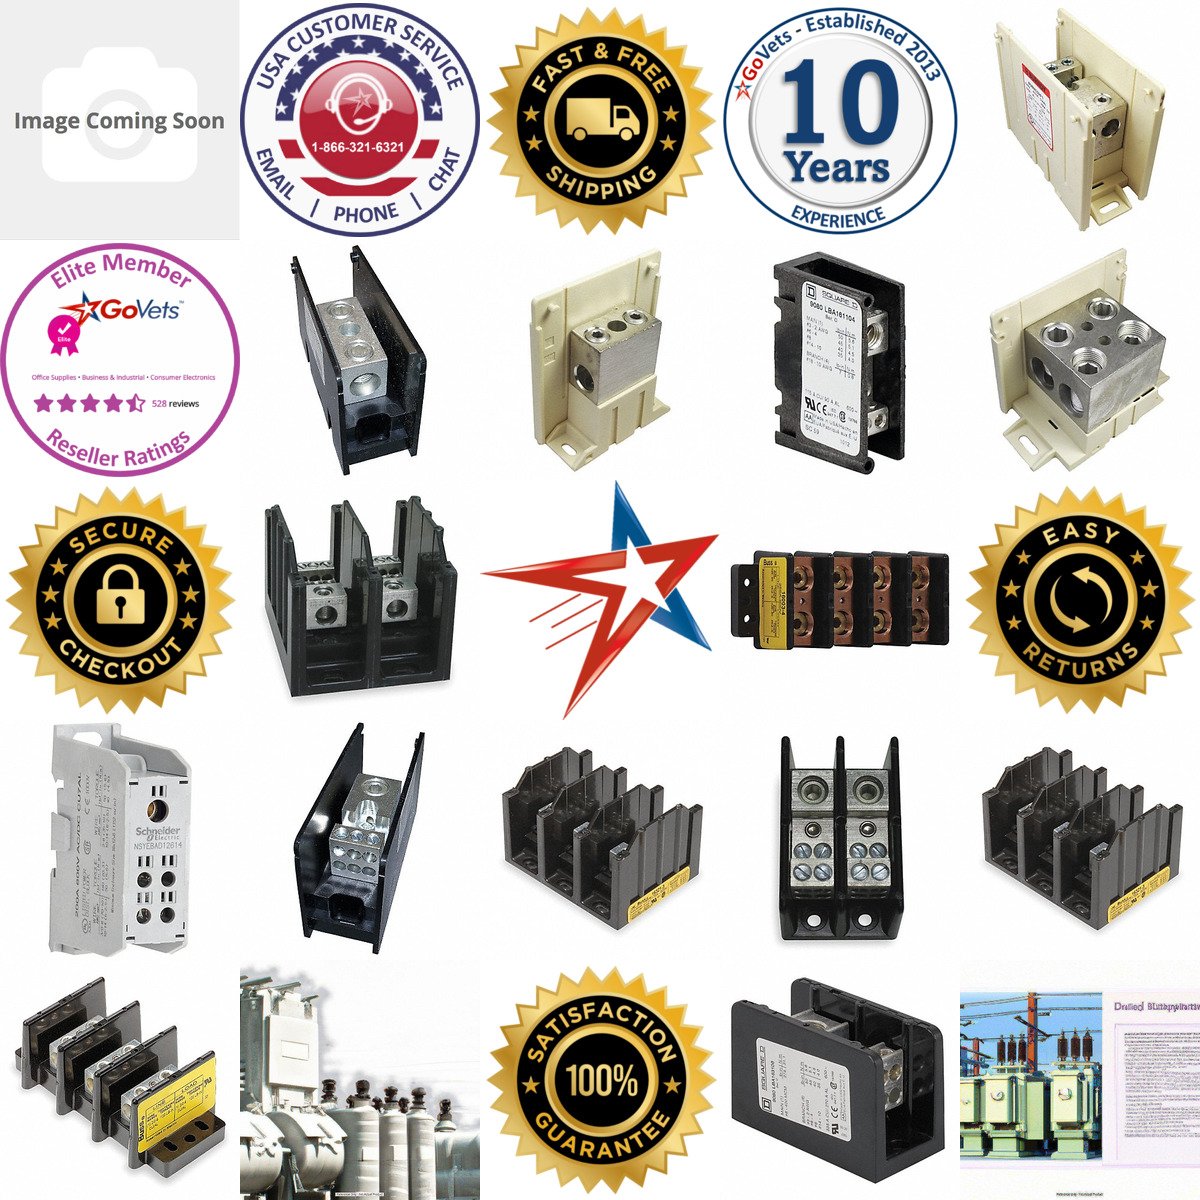 A selection of Power Distribution Blocks products on GoVets